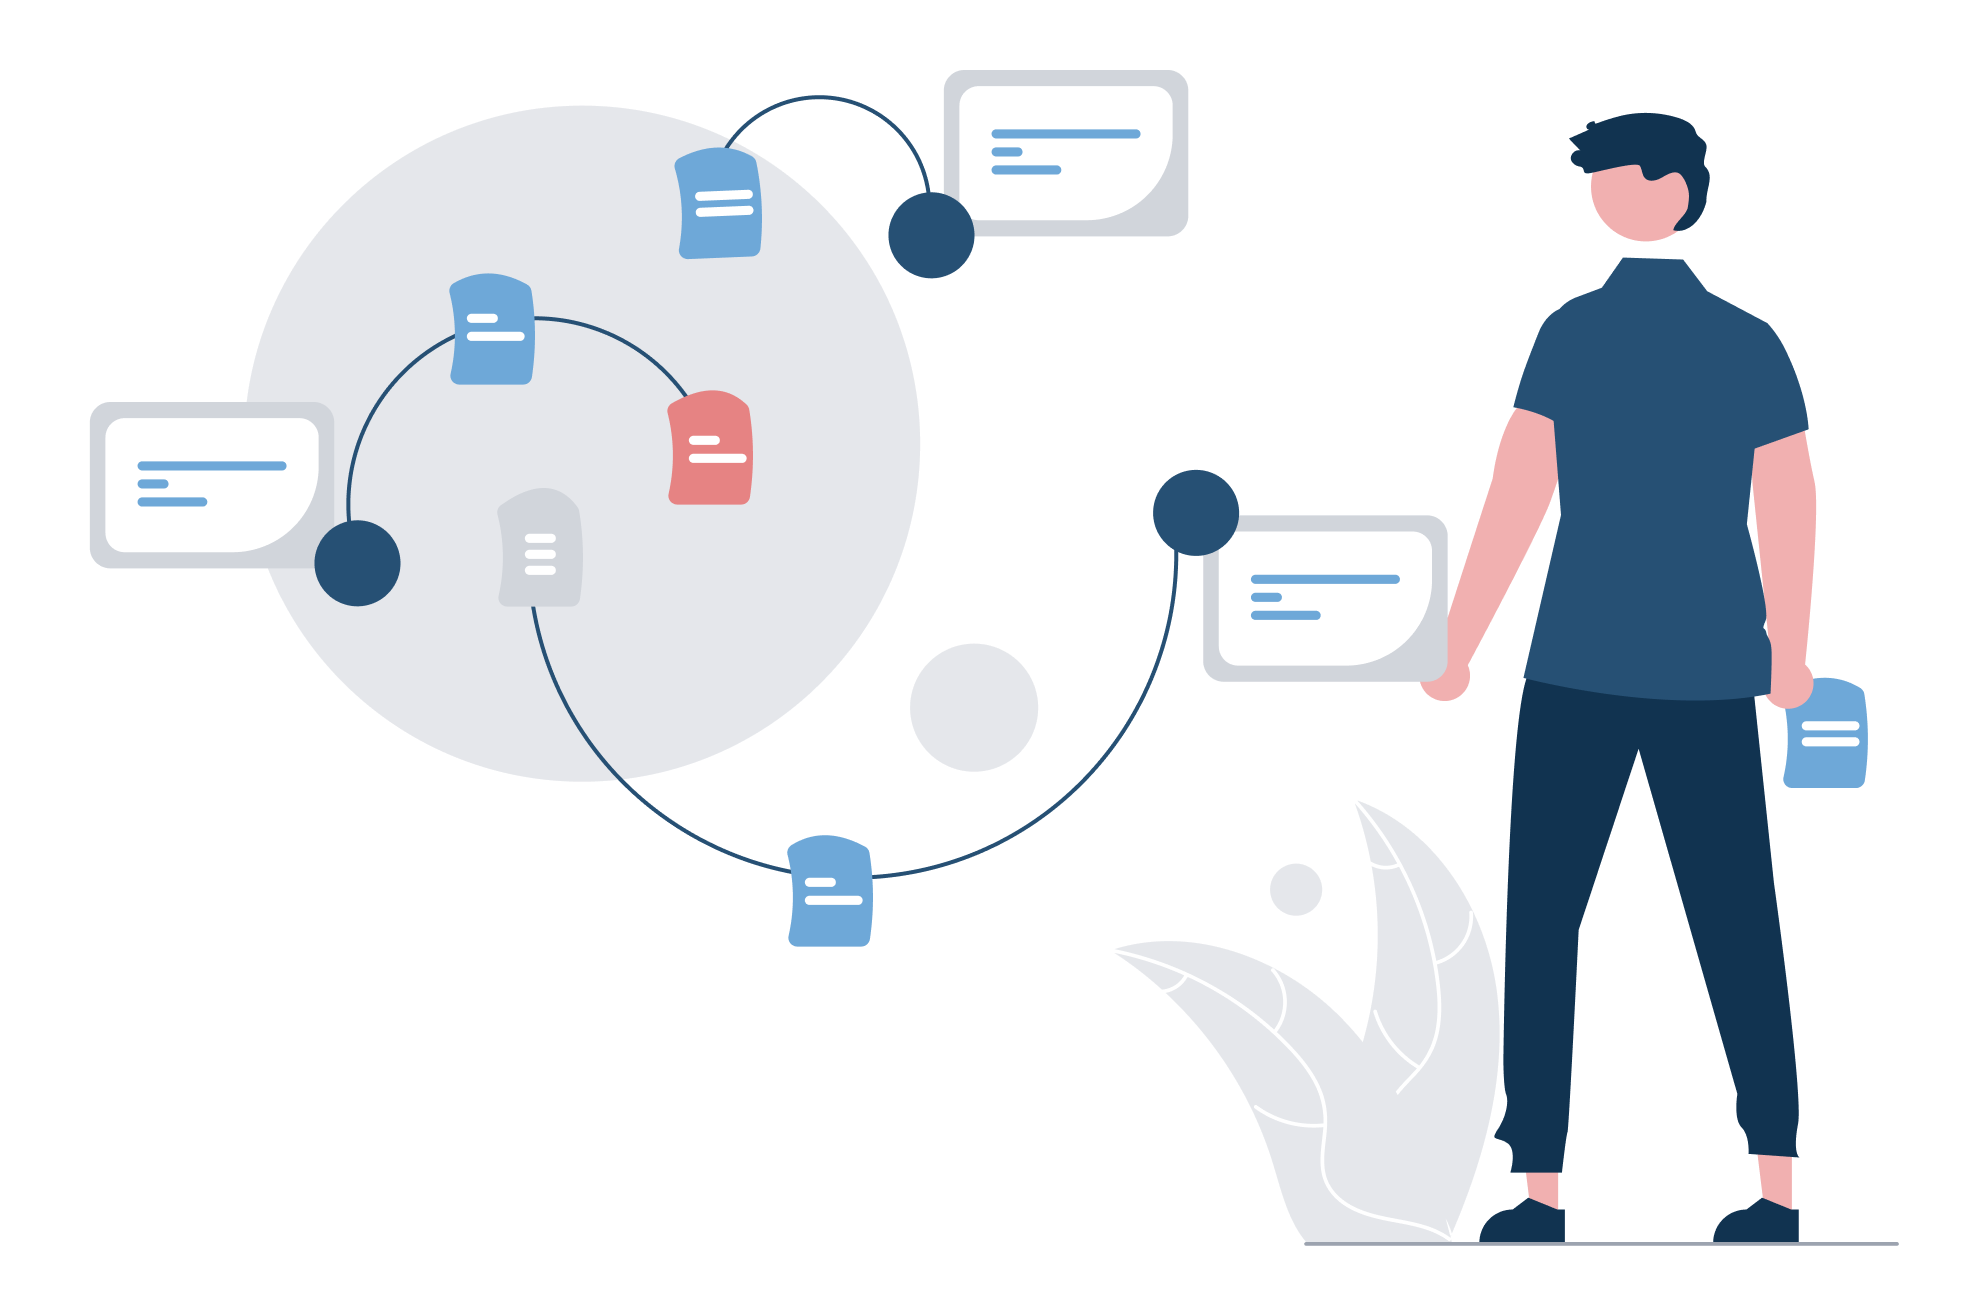 Illustration of a figure holding abstract representations of documents amidst a complicated workflow